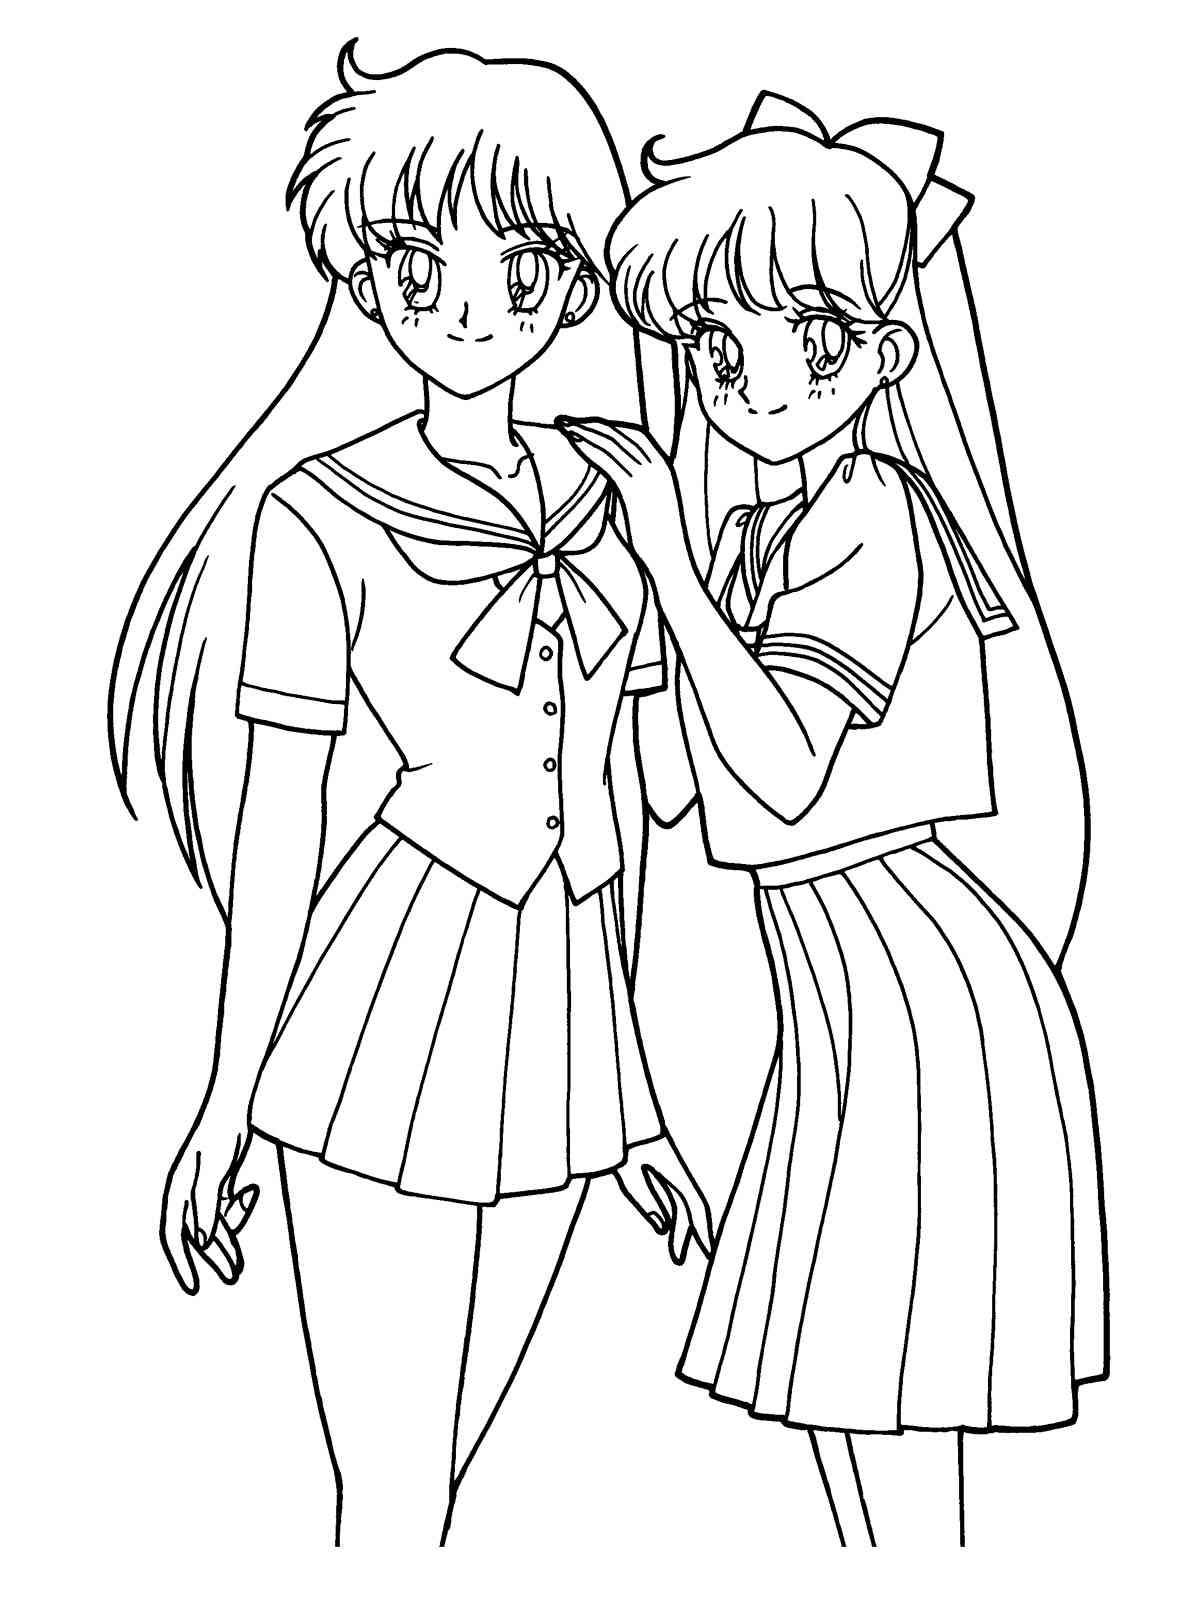 Anime Girl 29 coloring page